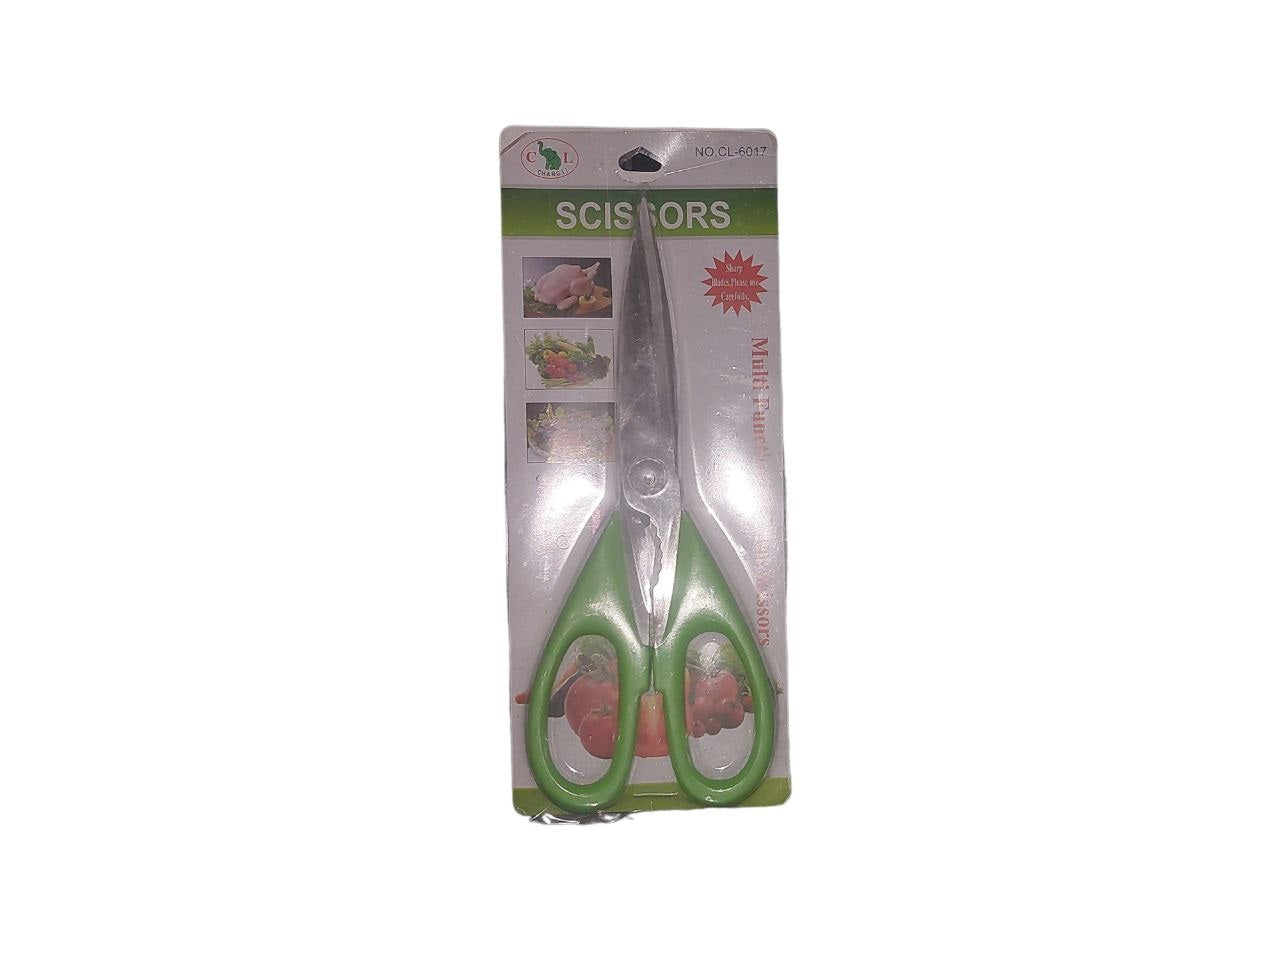 Kitchen Scissors With Multi Functions